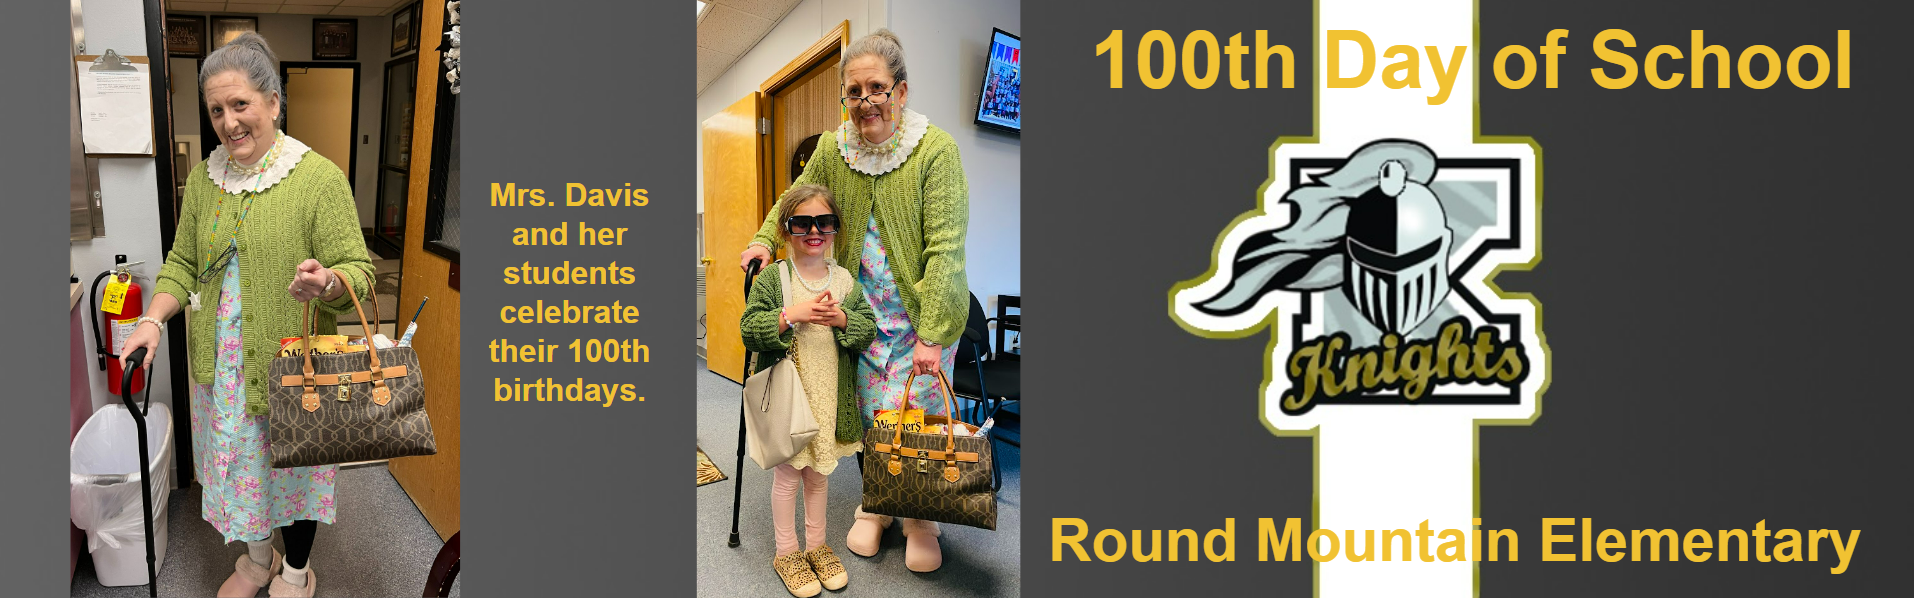 Mrs. Davis and her students celebrate the 100th day of school.